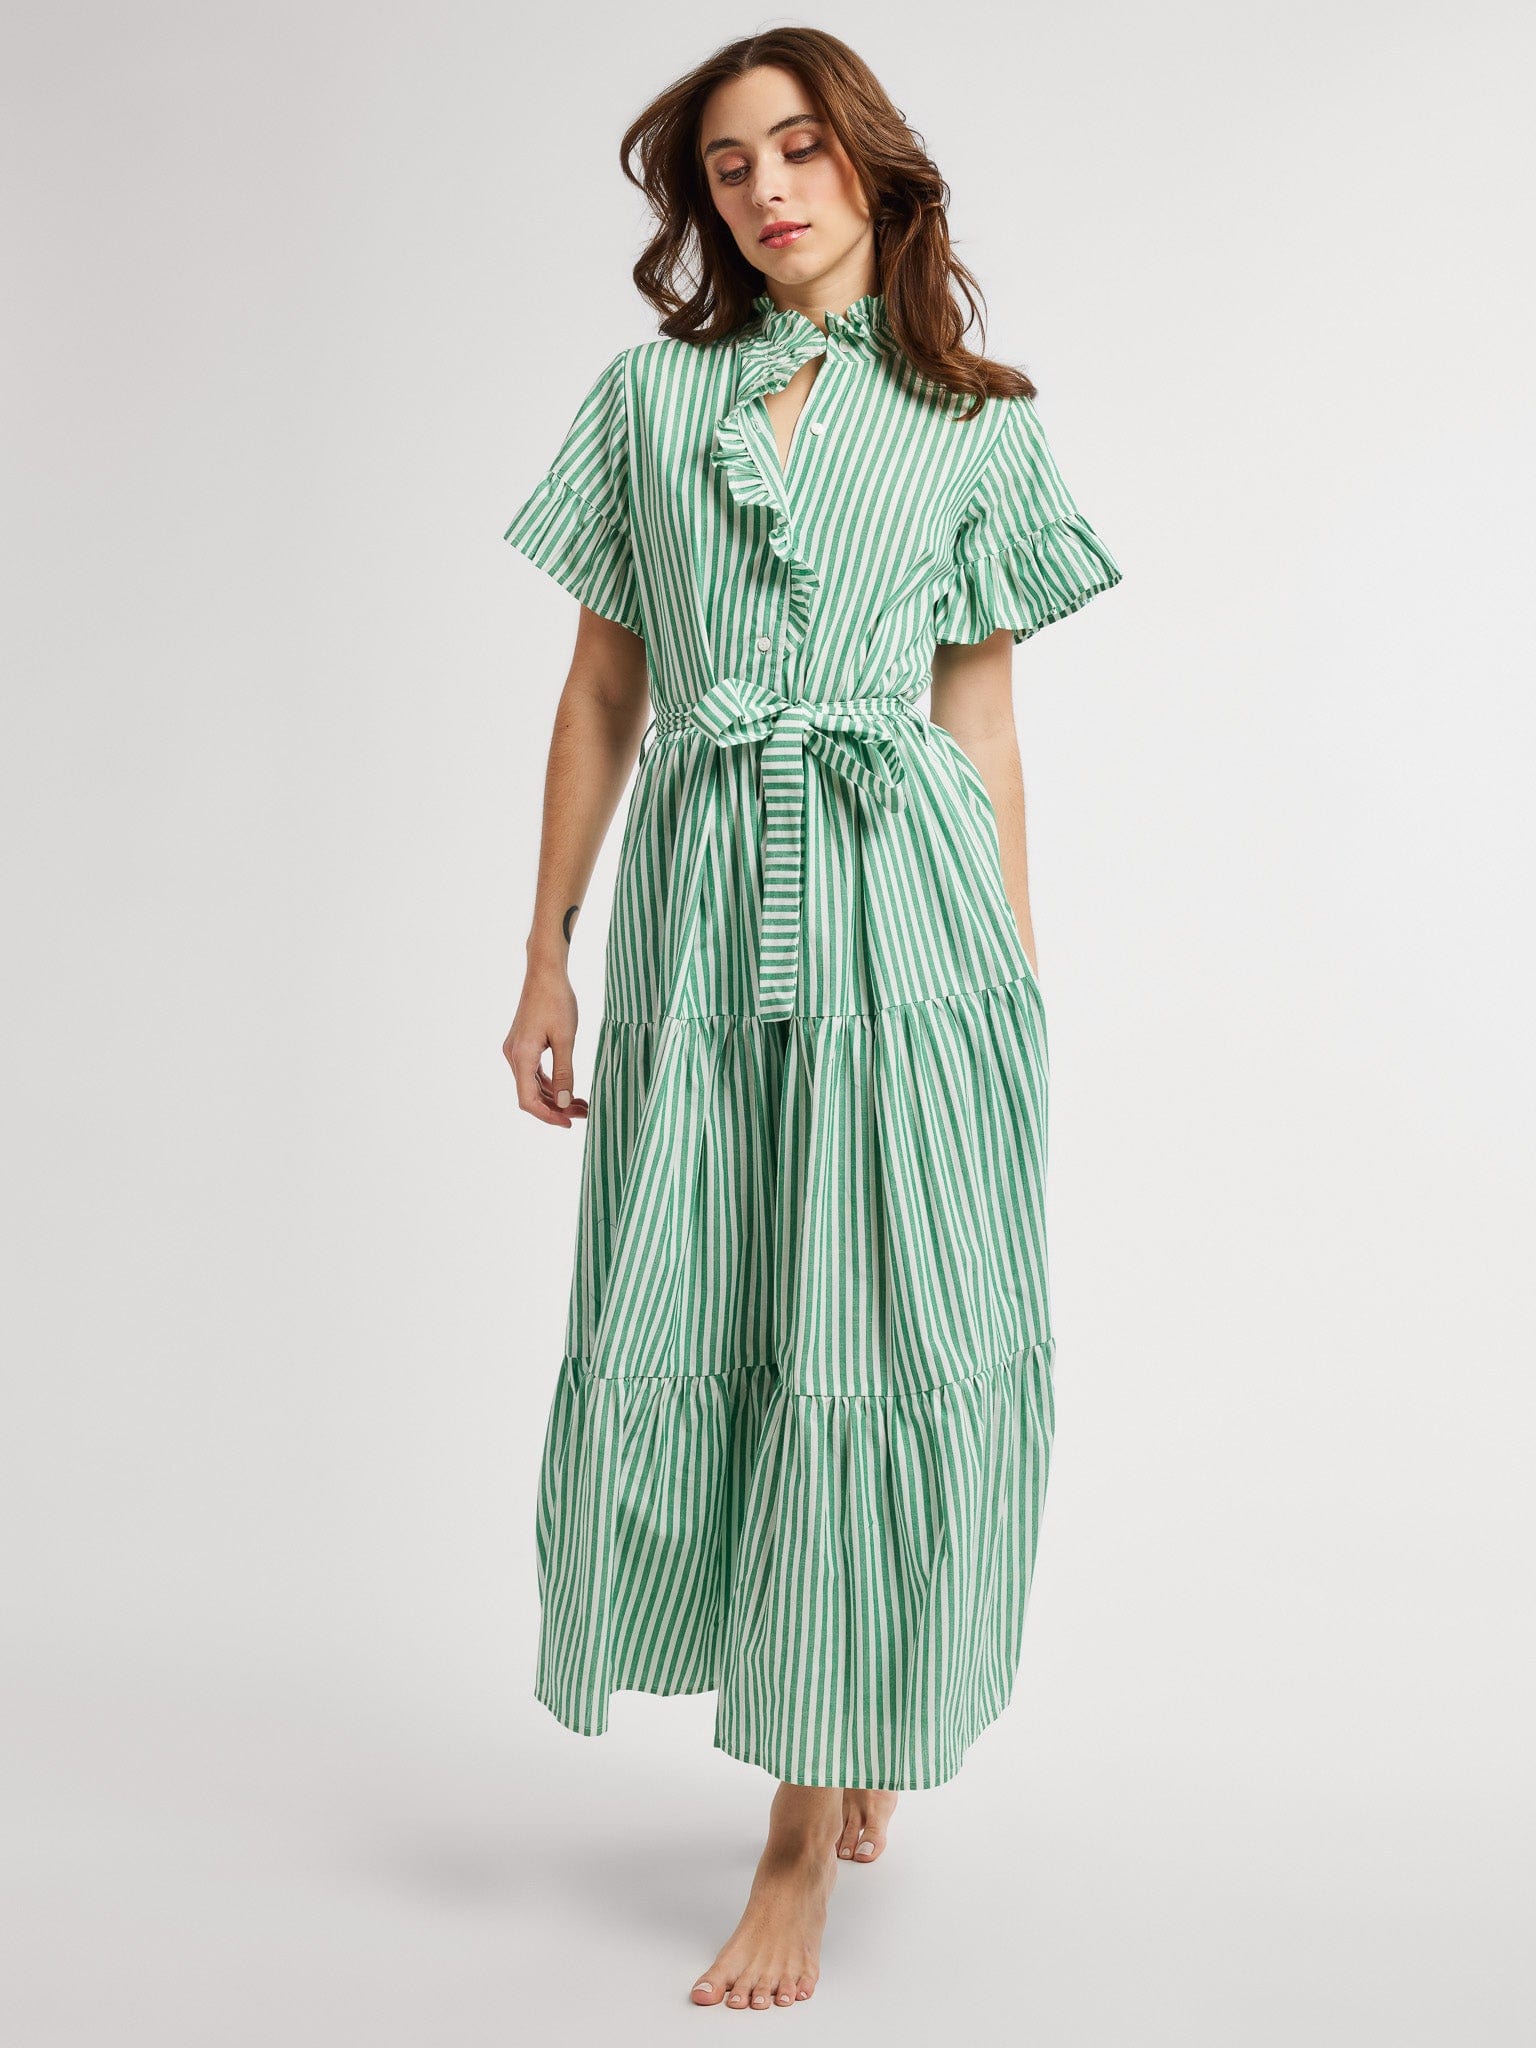 MILLE Clothing Victoria Dress in Kelly Stripe